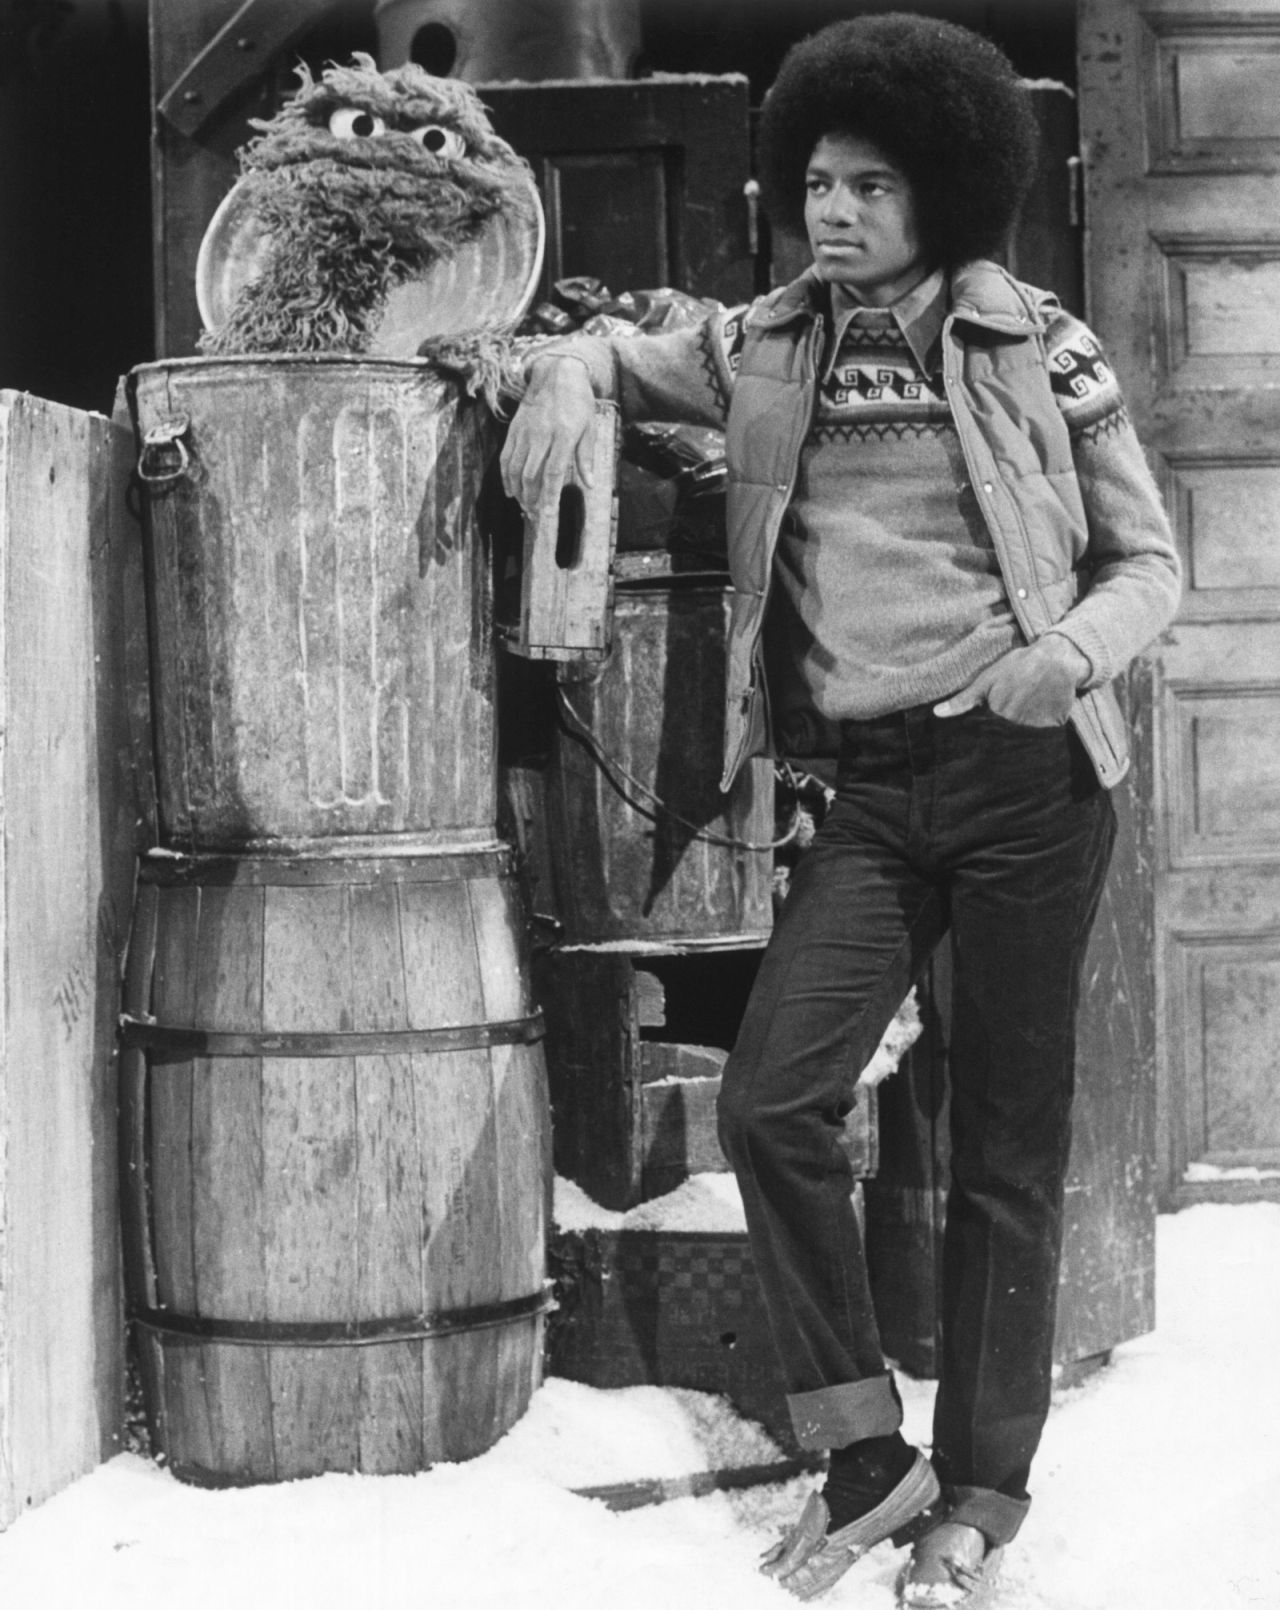 Michael Jackson, the "King of Pop," hangs out with Oscar the Grouch on a "Sesame Street" Christmas special in 1978.